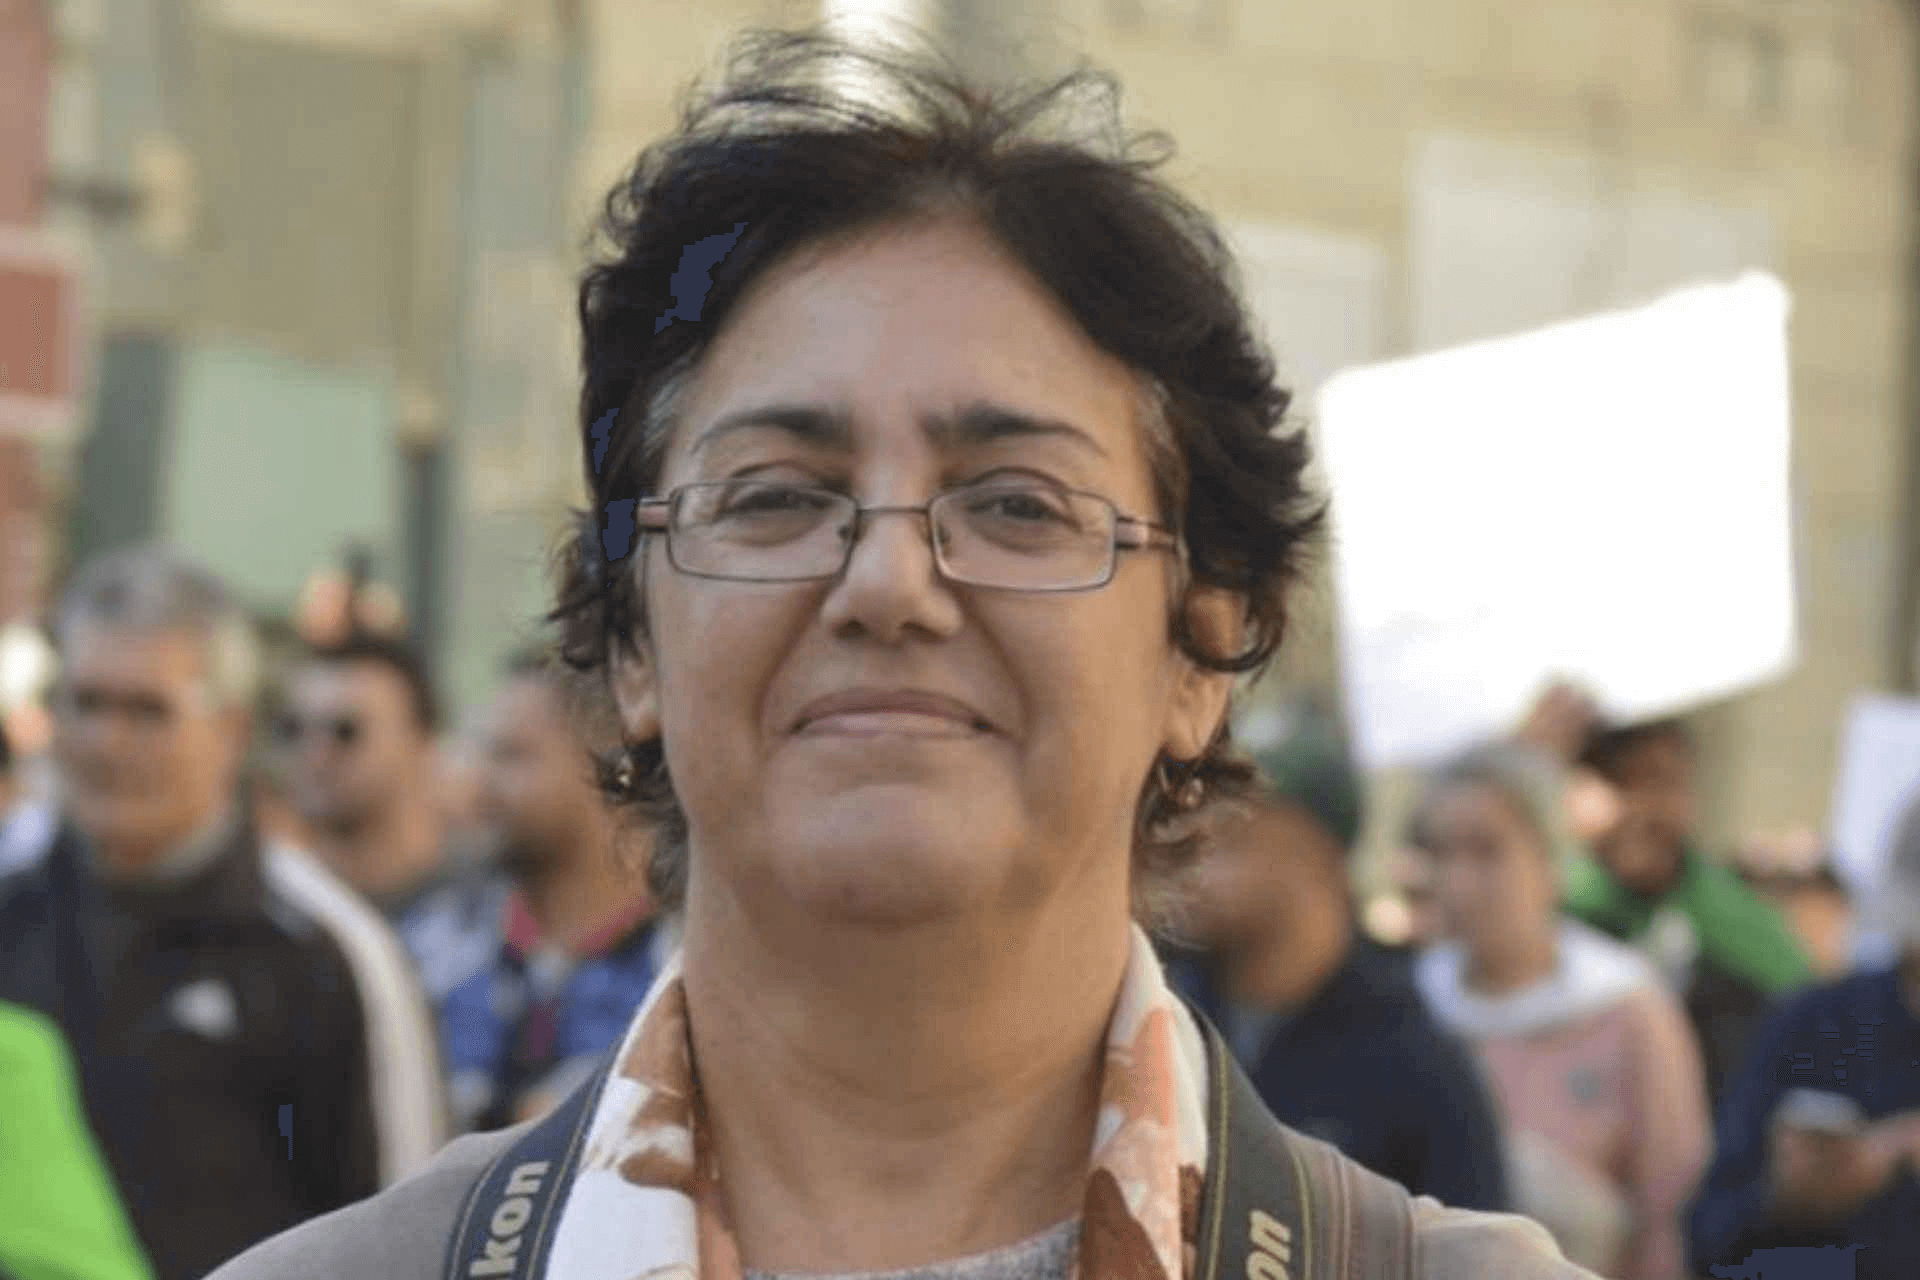 Algeria: Damning Testimony Of A Human Rights Activist Before The UN On The Widespread Repression